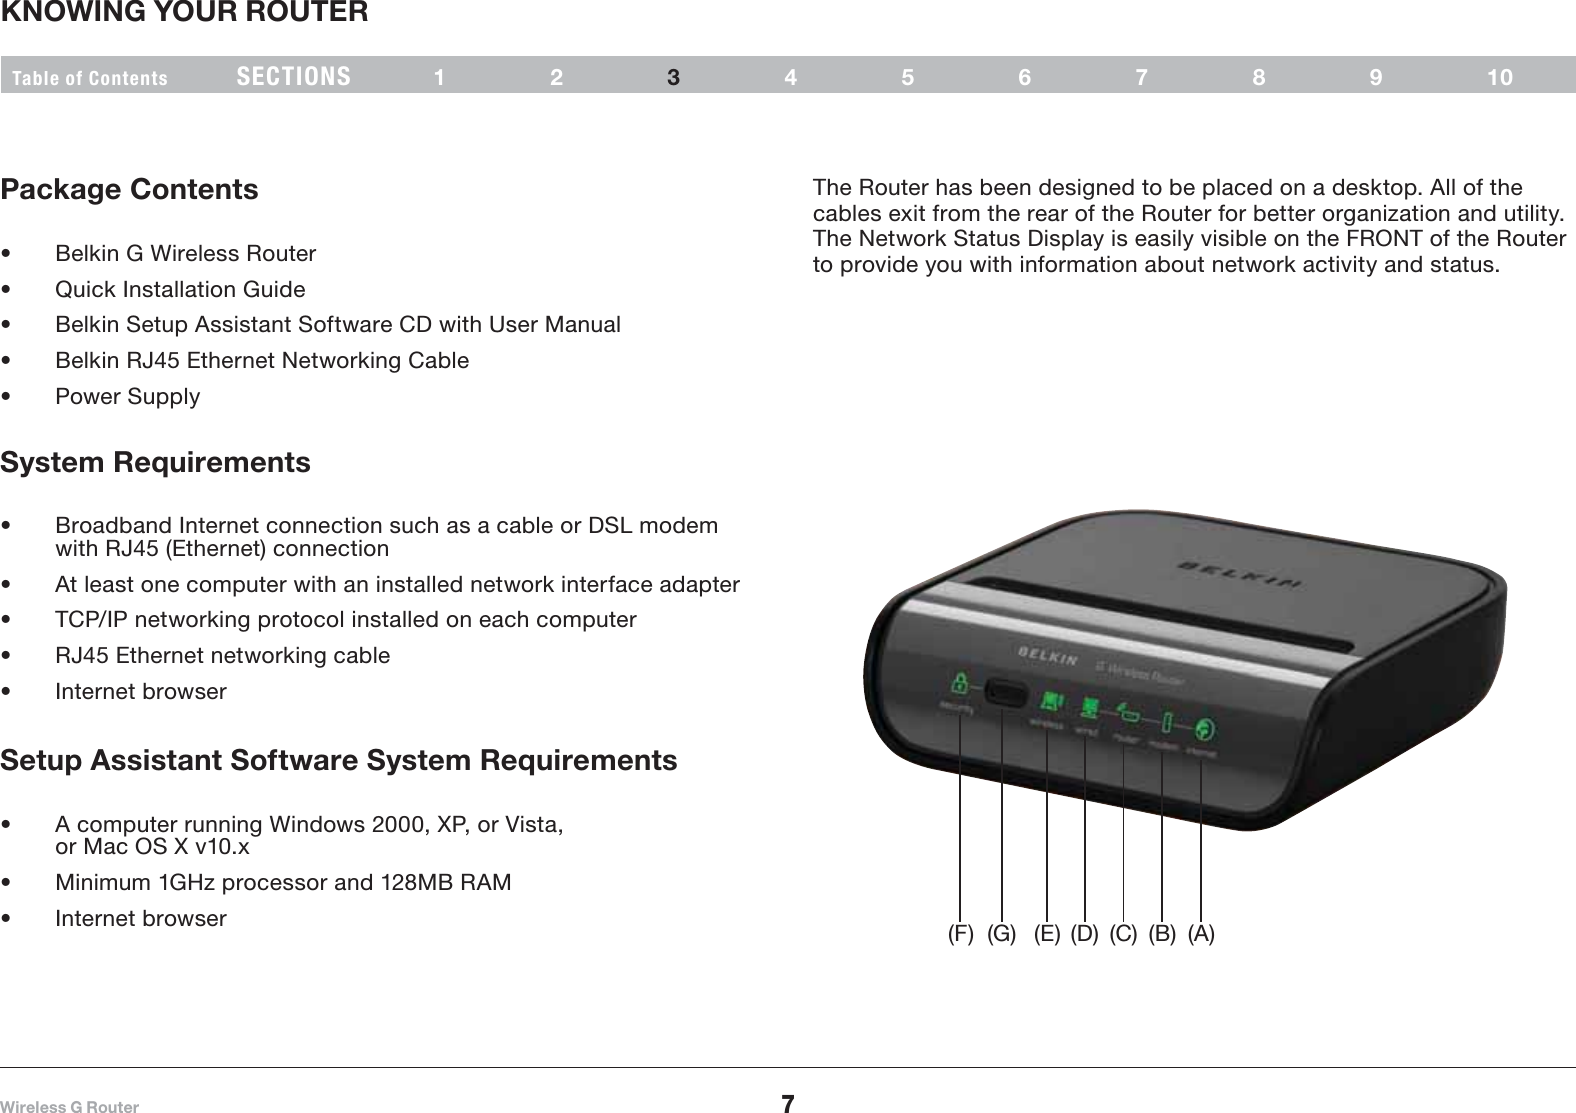 7Wireless G RouterSECTIONSTable of Contents 12 45678910KNOWING YOUR ROUTER3Package ContentsŘ Belkin G Wireless RouterŘ Quick Installation GuideŘ Belkin Setup Assistant Software CD with User ManualŘ Belkin RJ45 Ethernet Networking CableŘ Power SupplySystem RequirementsŘ Broadband Internet connection such as a cable or DSL modem with RJ45 (Ethernet) connectionŘ At least one computer with an installed network interface adapterŘ TCP/IP networking protocol installed on each computerŘ RJ45 Ethernet networking cableŘ Internet browserSetup Assistant Software System RequirementsŘ A computer running Windows 2000, XP, or Vista,or Mac OS X v10.xŘ Minimum 1GHz processor and 128MB RAMŘ Internet browser The Router has been designed to be placed on a desktop. All of the cables exit from the rear of the Router for better organization and utility.The Network Status Display is easily visible on the FRONT of the Router to provide you with information about network activity and status.(F) (G) (E) (D) (C) (B) (A)